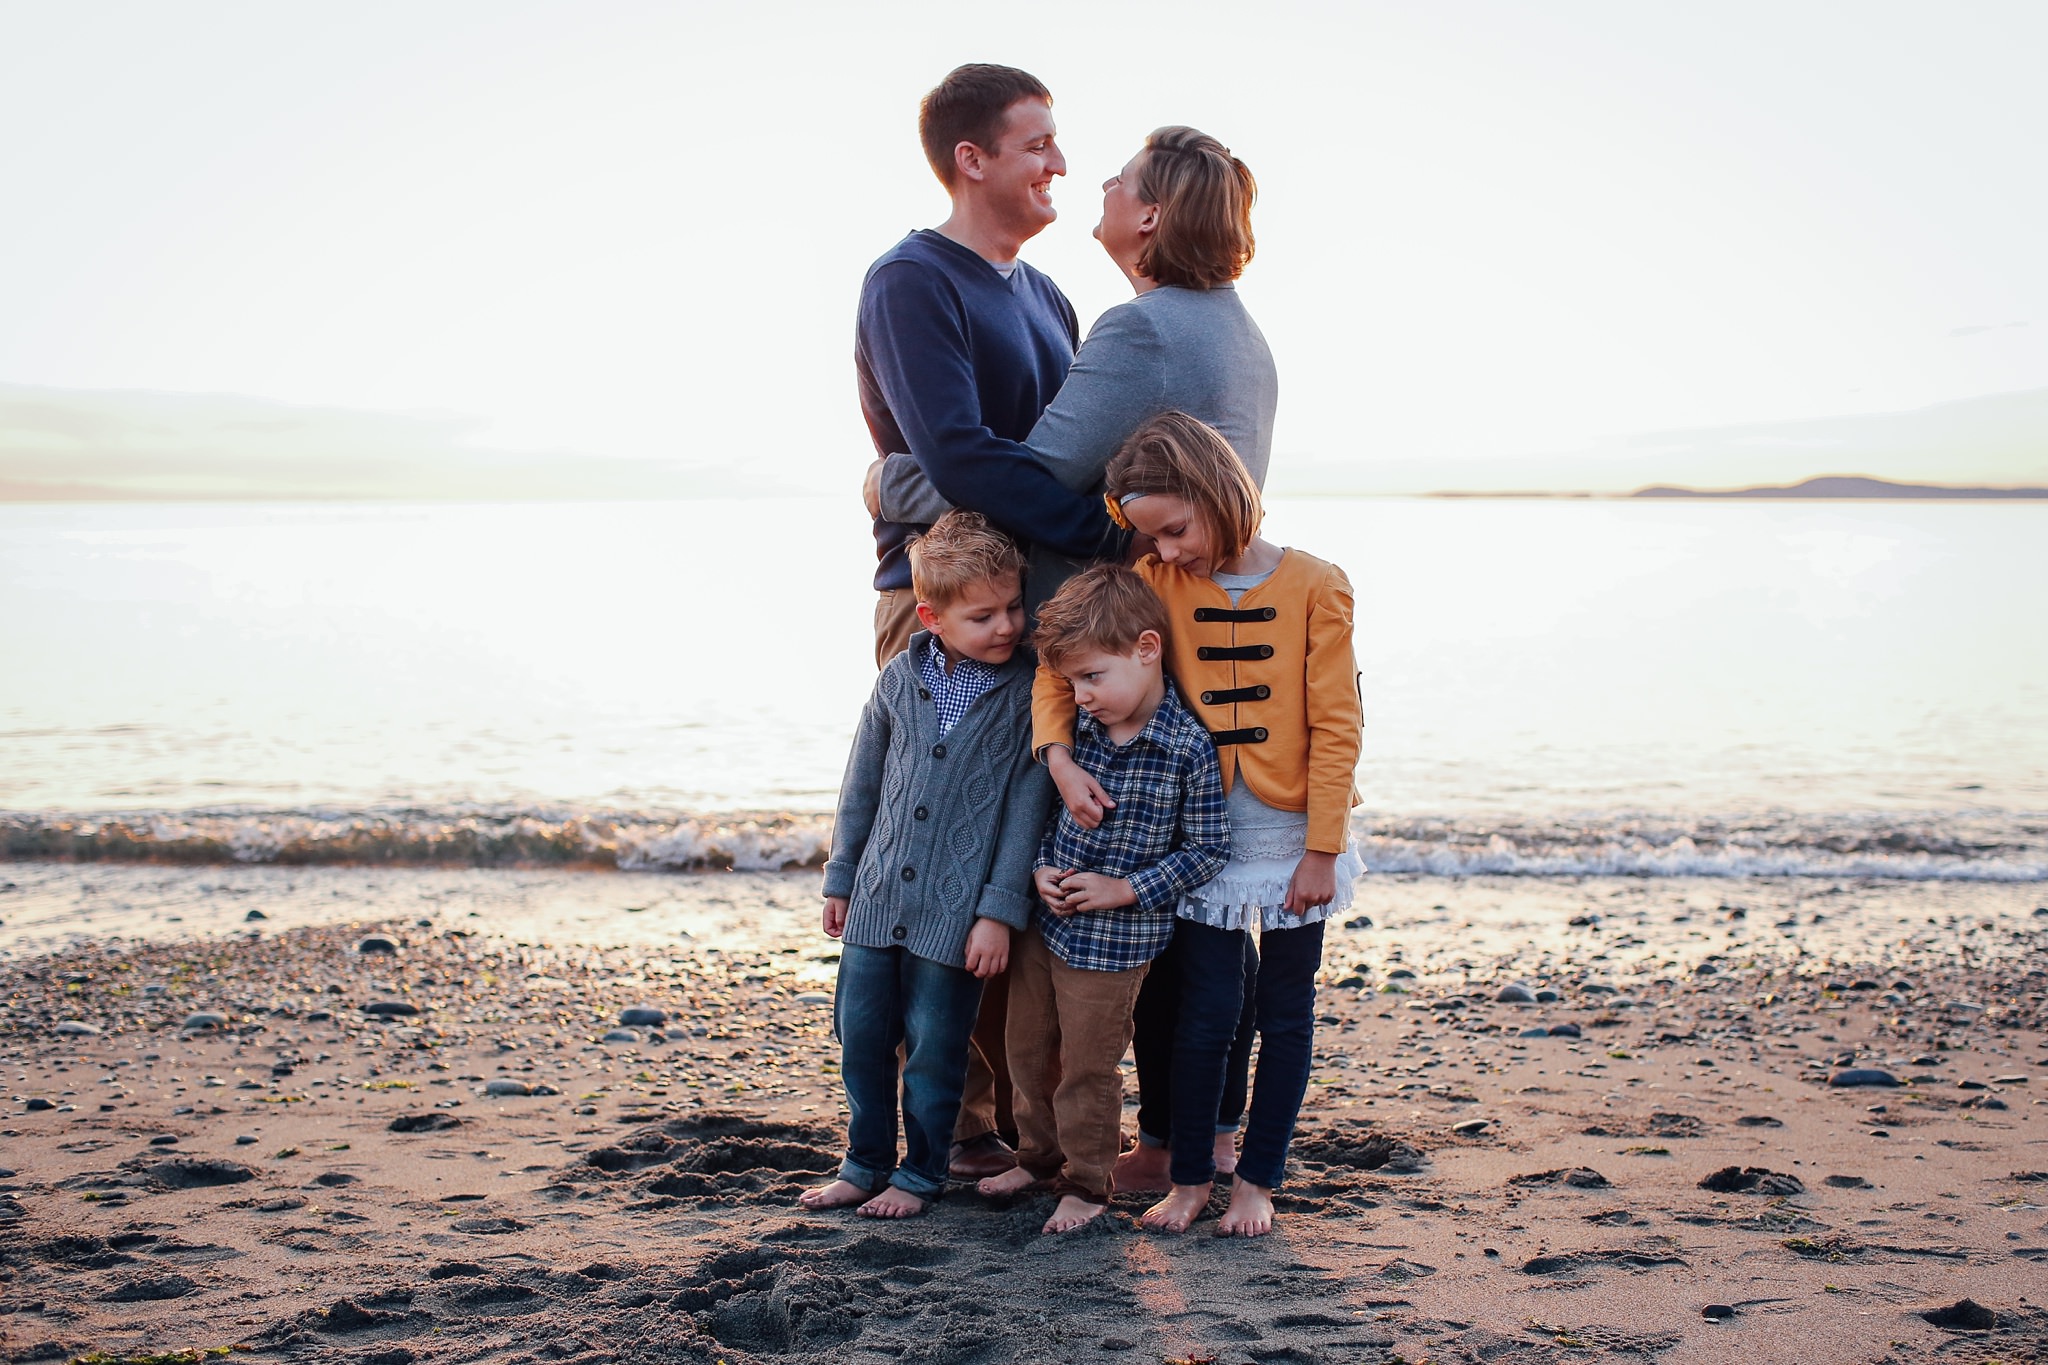 Whidbey-Island-Family-Photographer-Kara-Chappell-Photography_1219.jpg